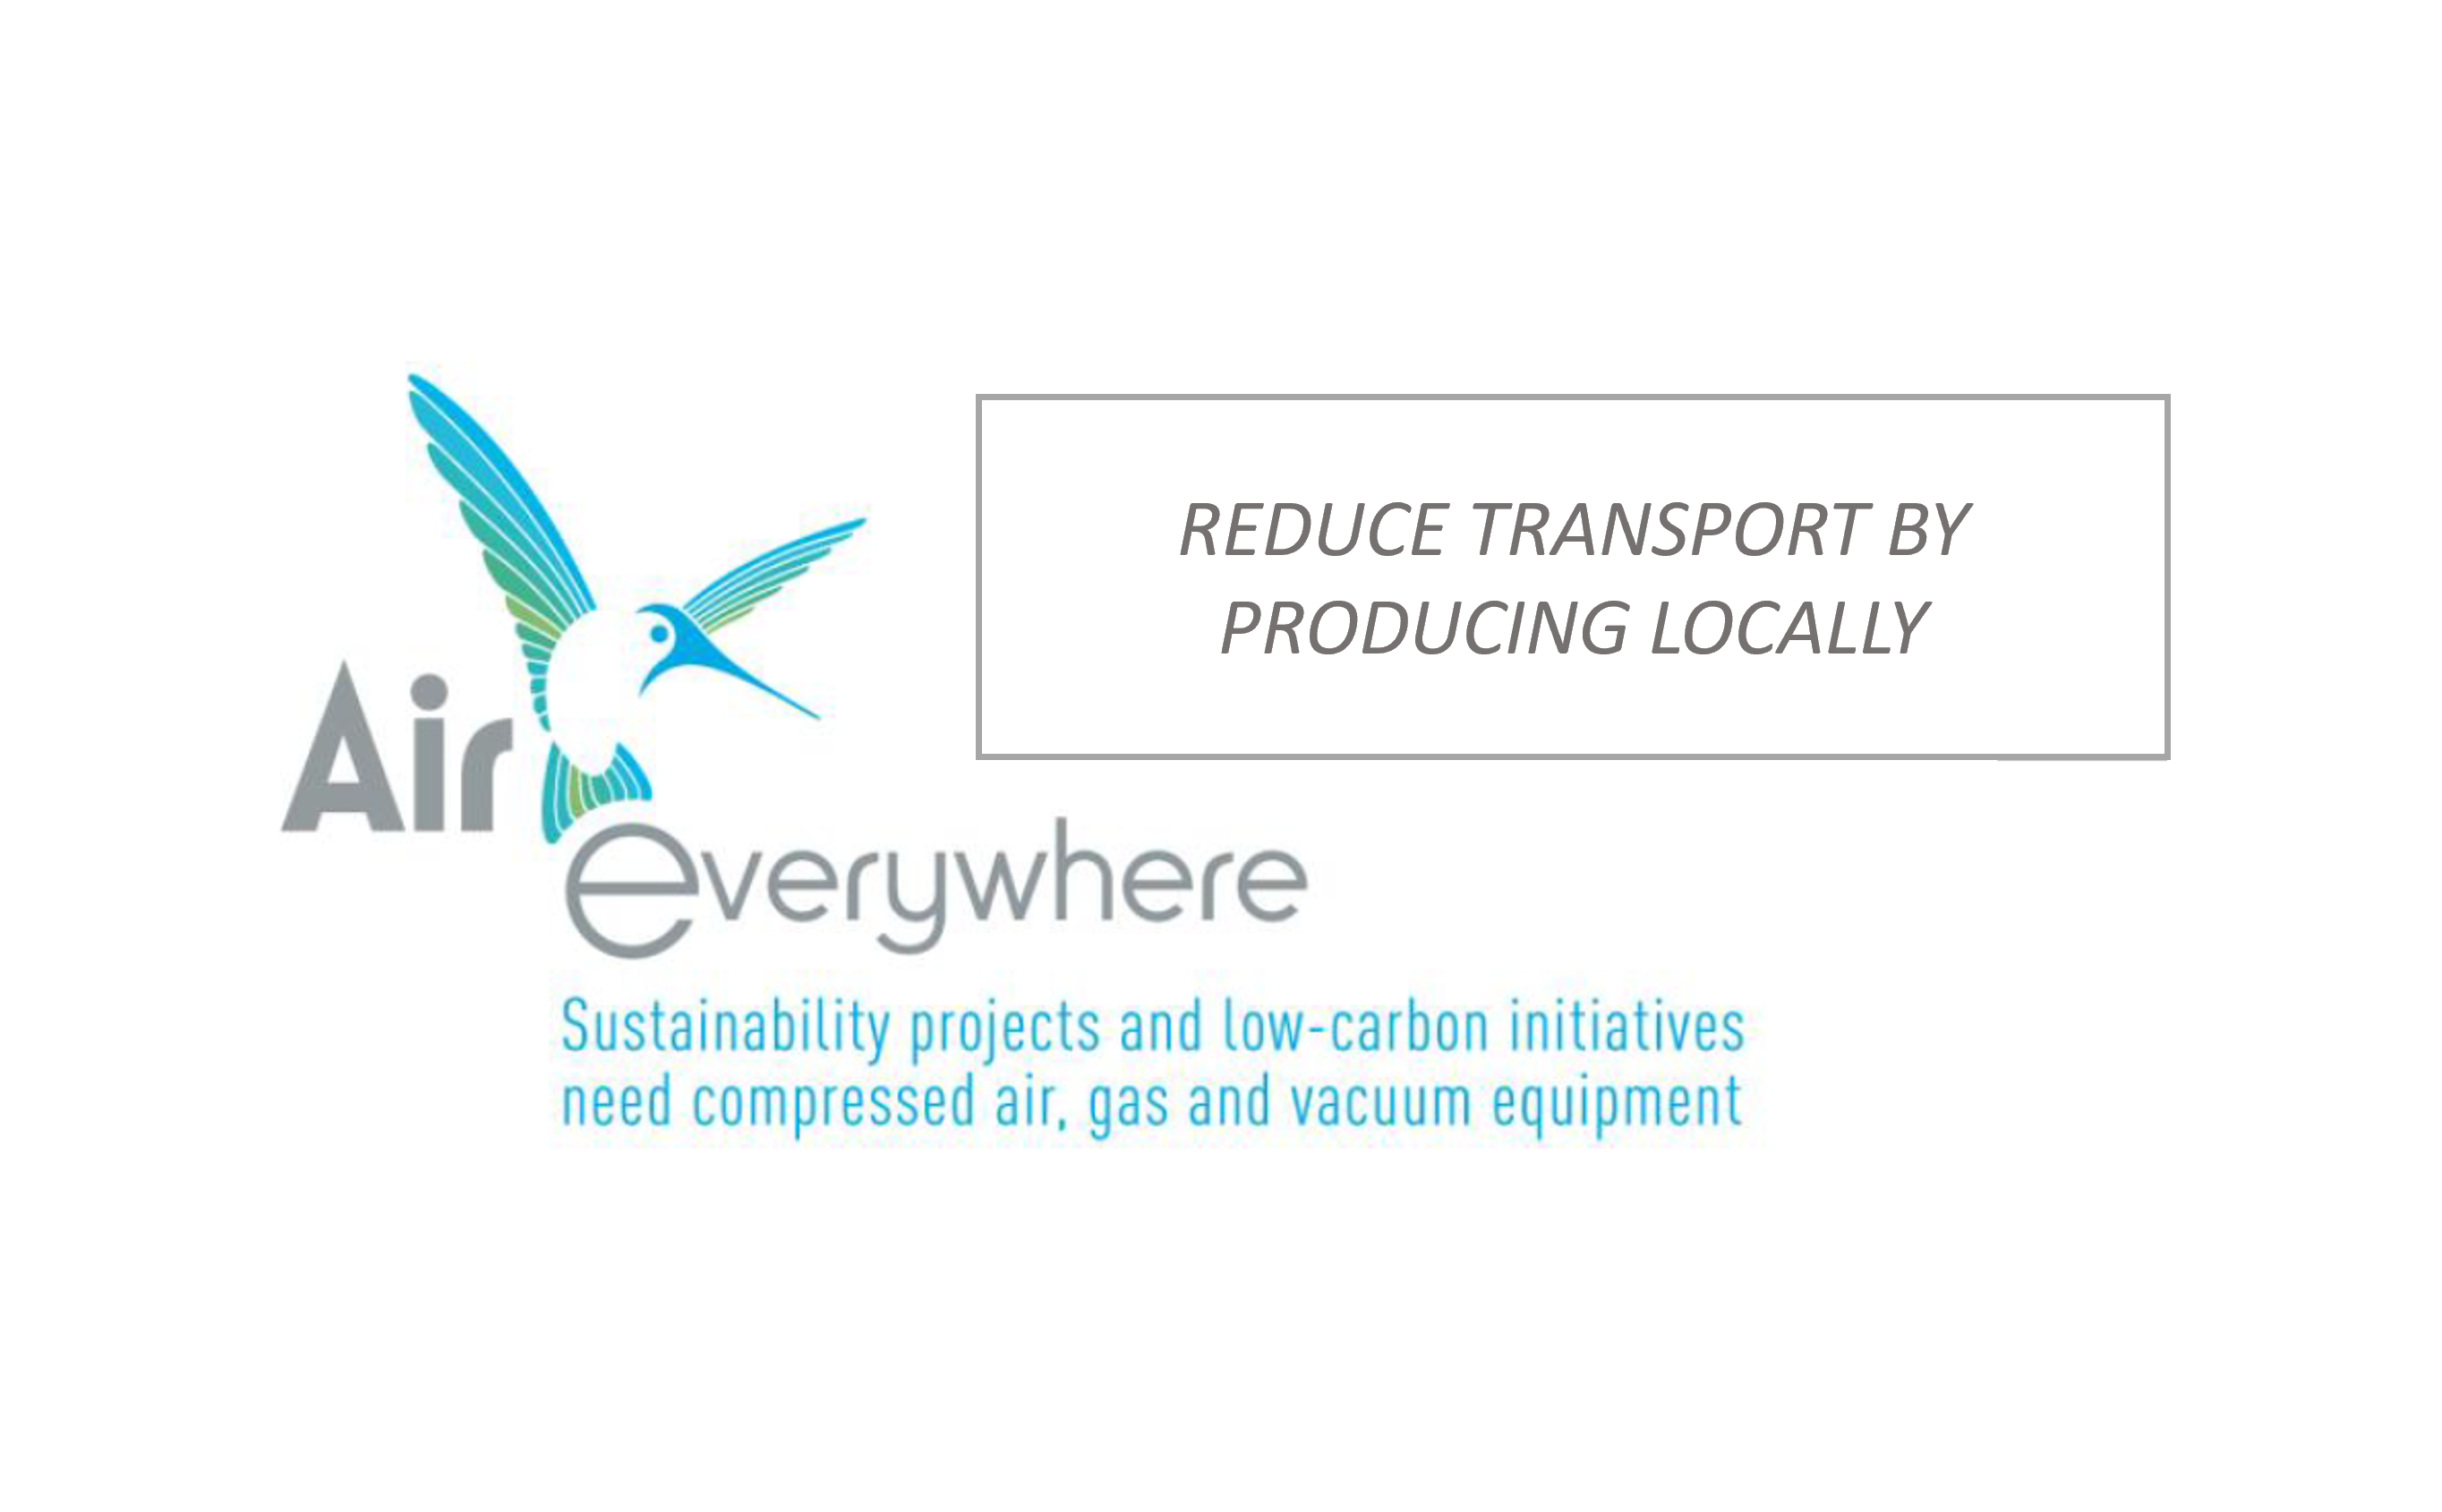 Reduce transport by producing locally